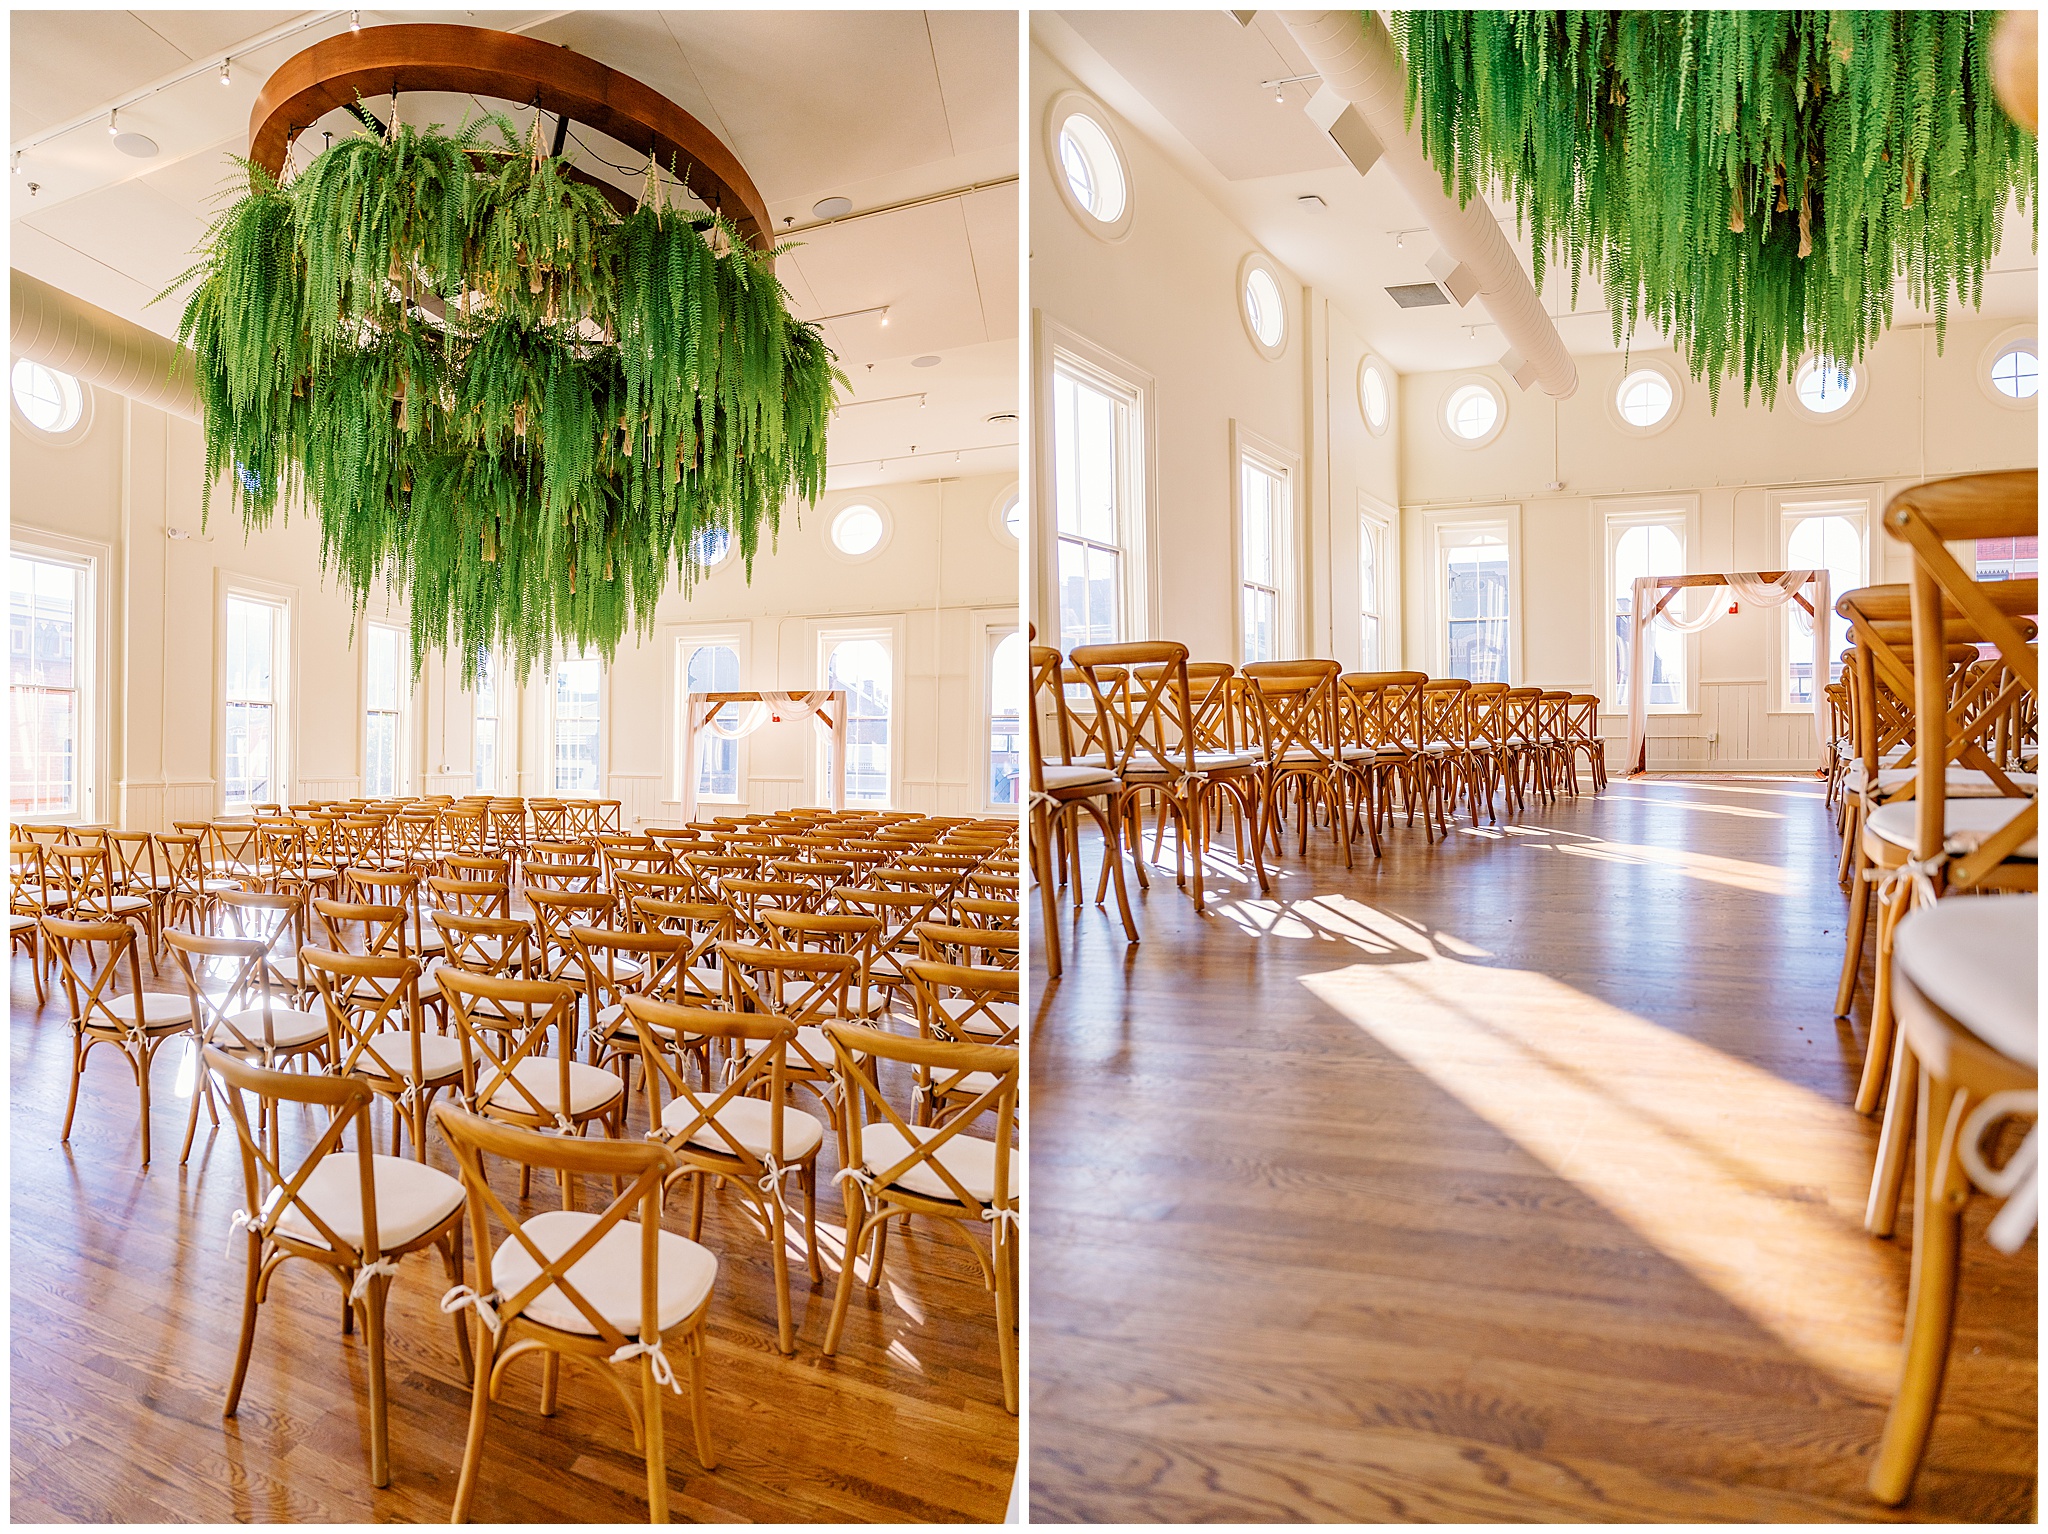 A look down the aisle of a wedding ceremony with wooden chairs and a wooden beam arbor draped with a white fabric